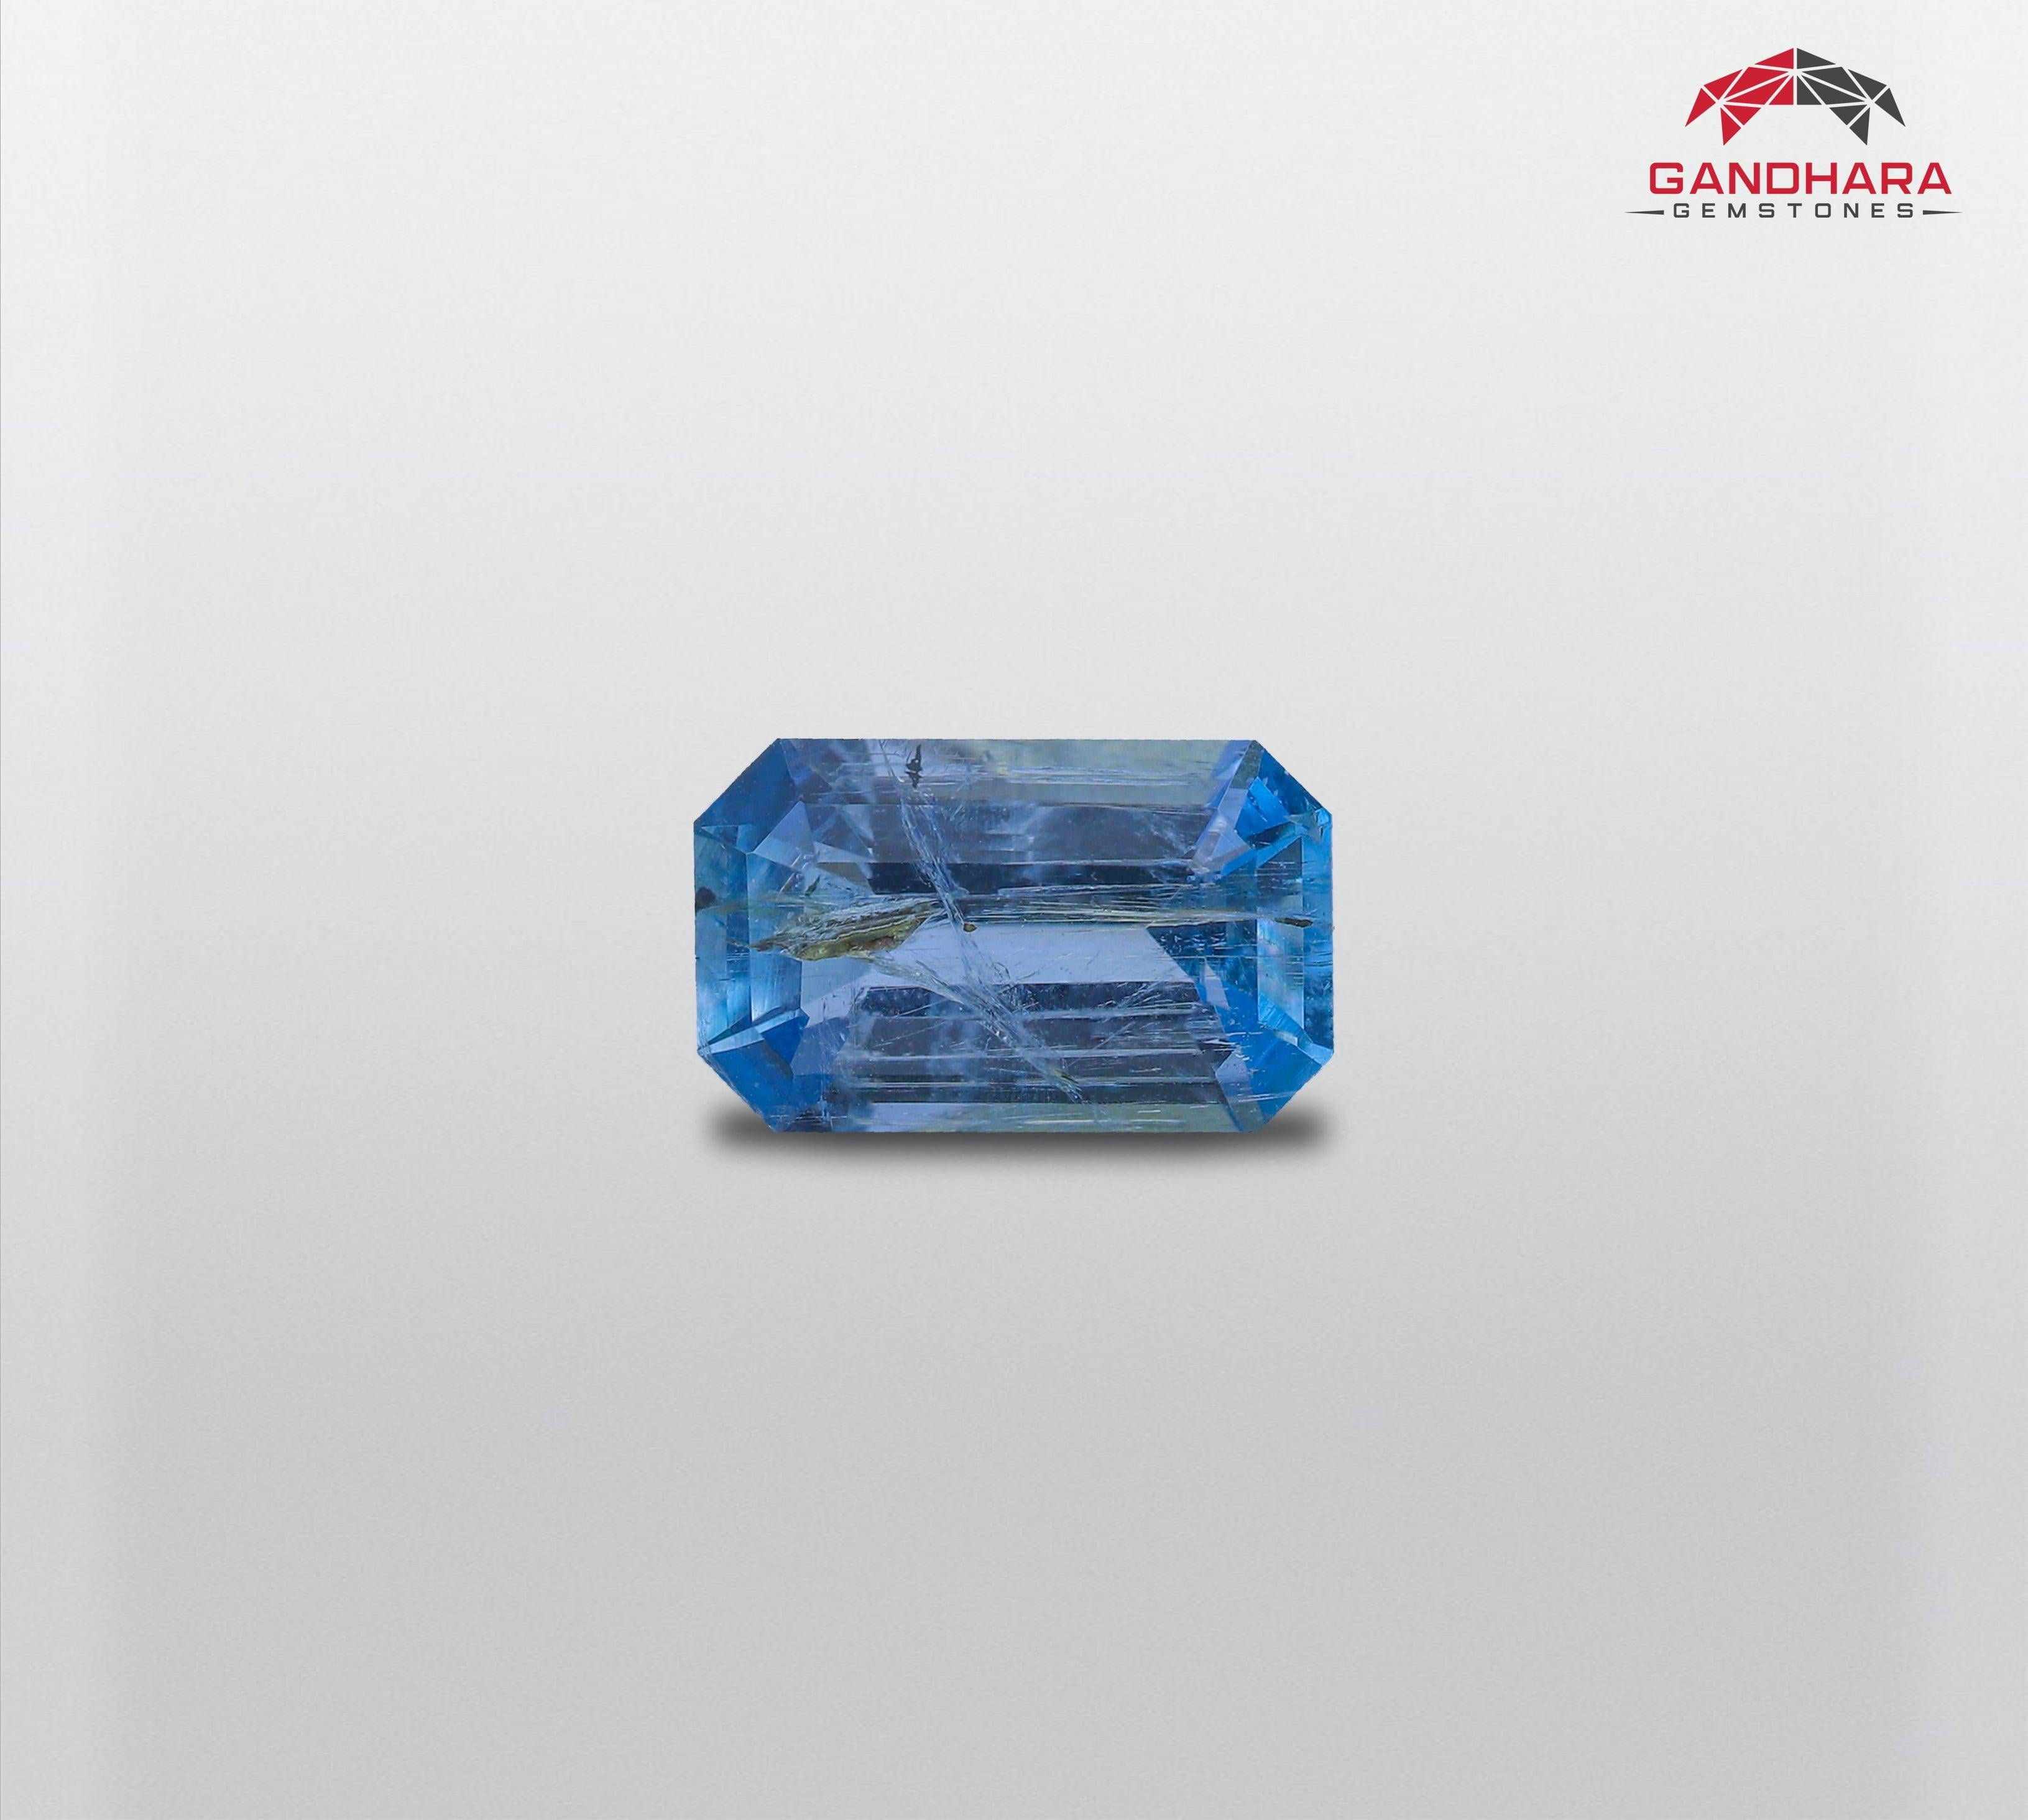 Deep Blue Santa Maria Aquamarine , available for sale, natural high quality, flawless Included clarity, 0.92 carats certified aquamarine gemstone from Santa maria,Brazil.

Light Sea Blue Aquamarine Stone For Jewelry Information:
GEMSTONE NAME	Deep